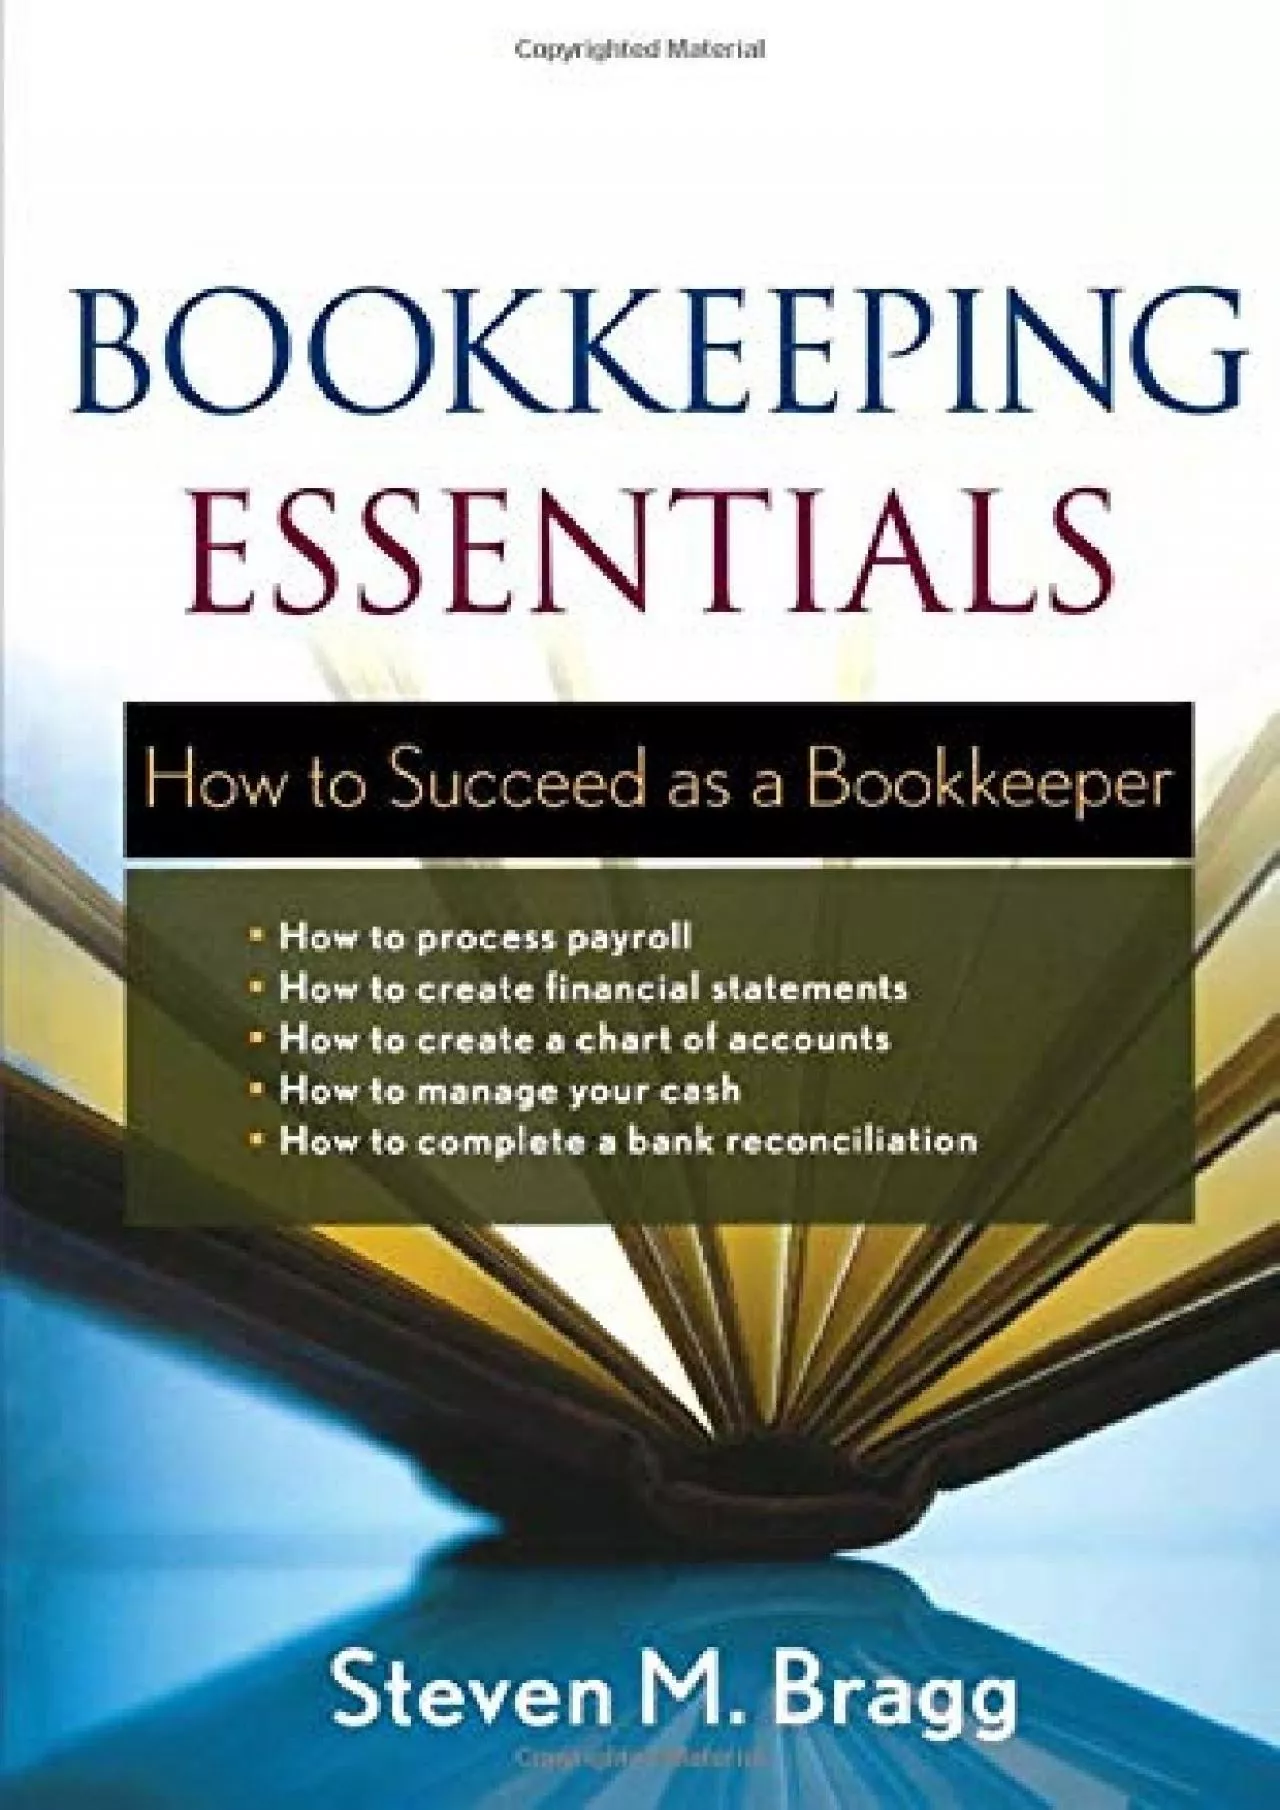 (DOWNLOAD)-Bookkeeping Essentials: How to Succeed as a Bookkeeper